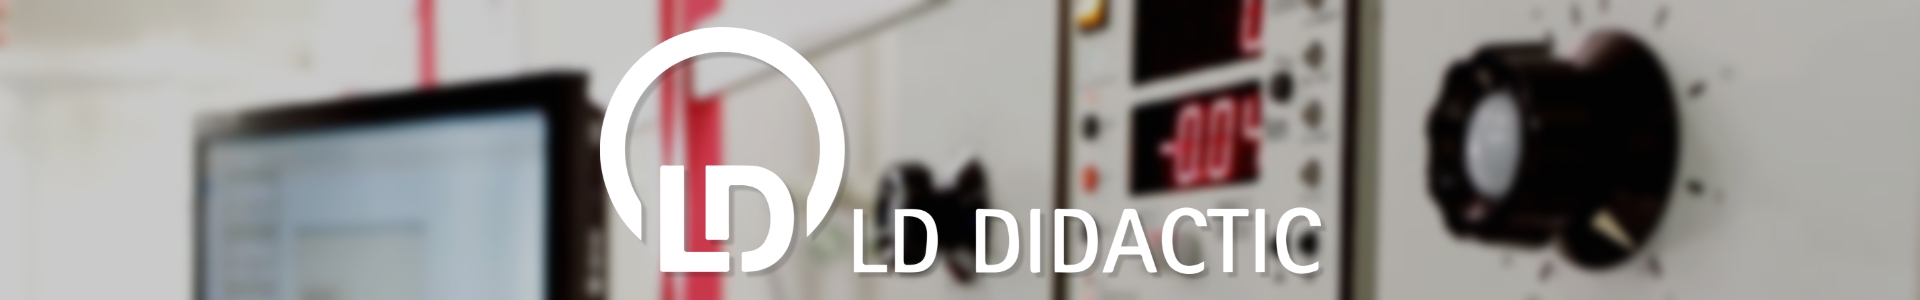 LD didactic brand - LD-DIDACTIC